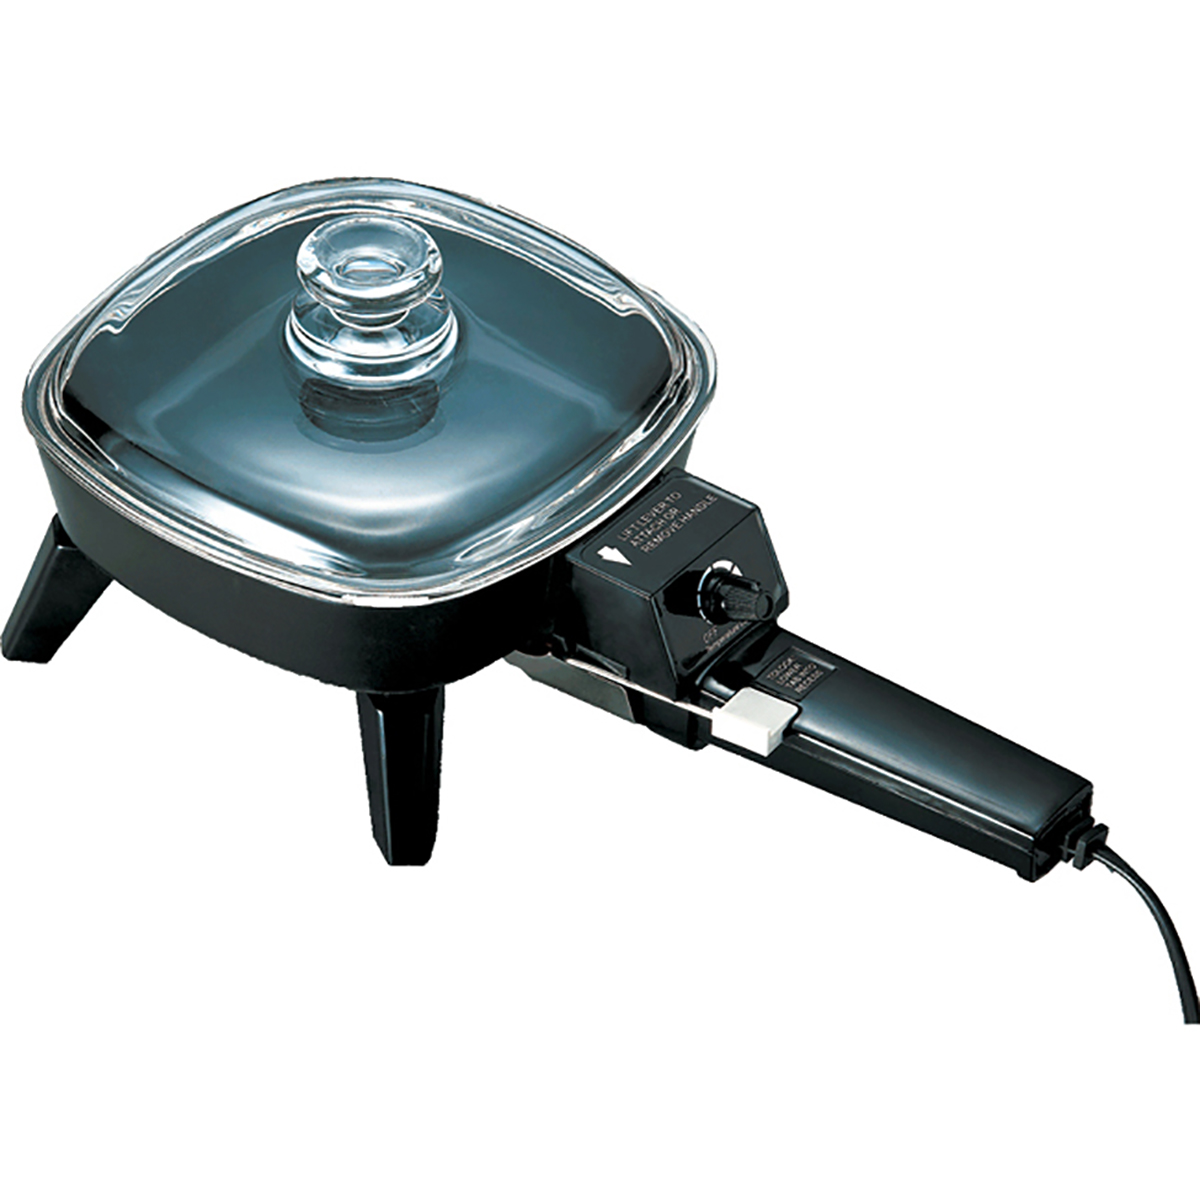 Brentwood(R) 6 In. Non-Stick Electric Skillet